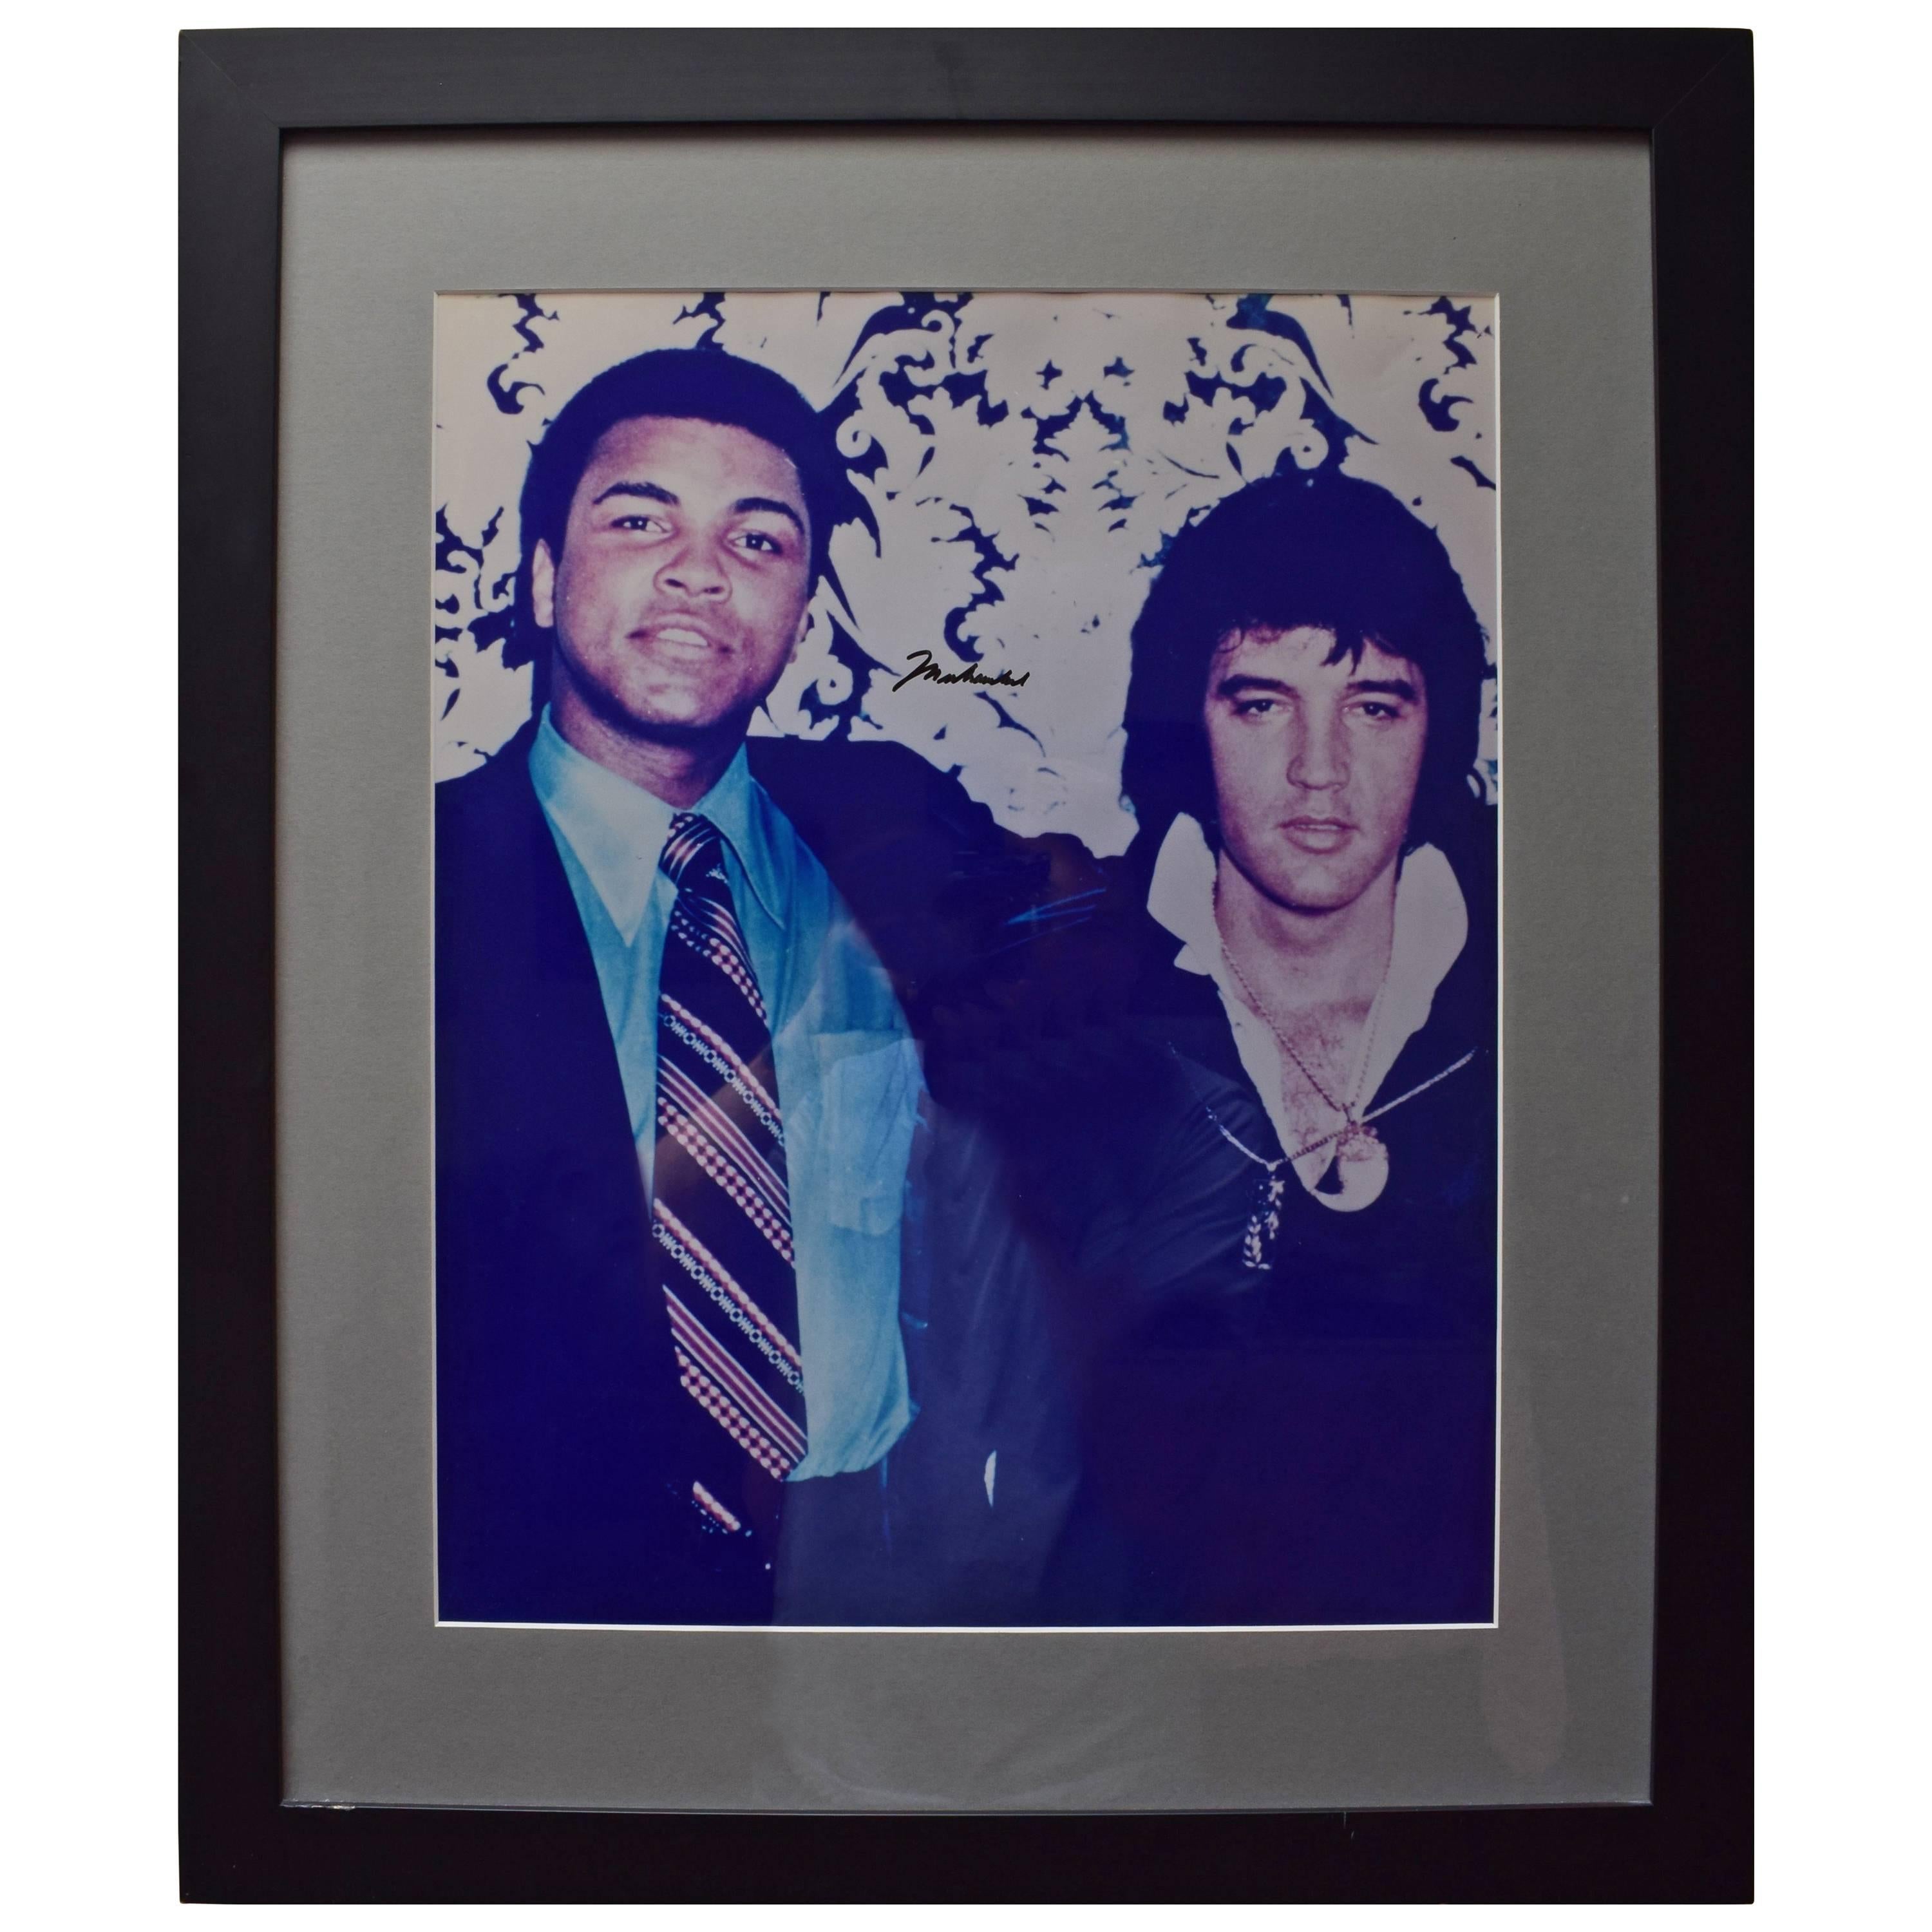 Magnificent Signed Autographed 16x20 Framed Photo of Muhammad Ali & Elvis COA